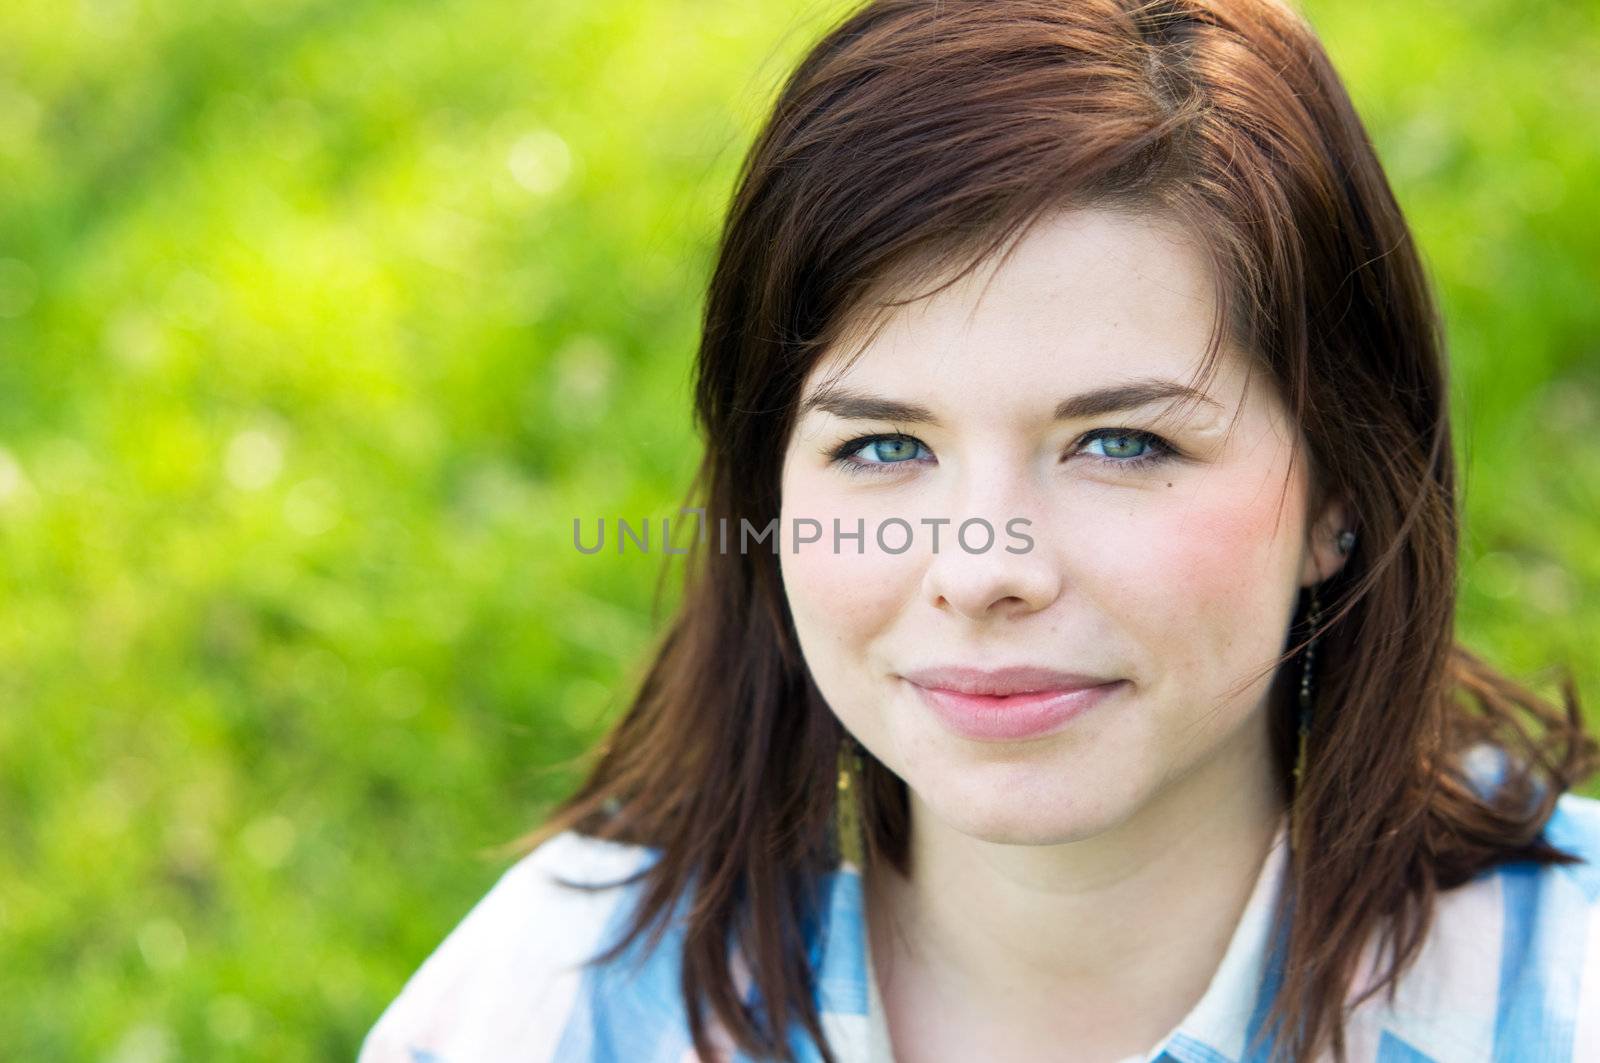 Young happy girl portrait on grass, spring flowers background